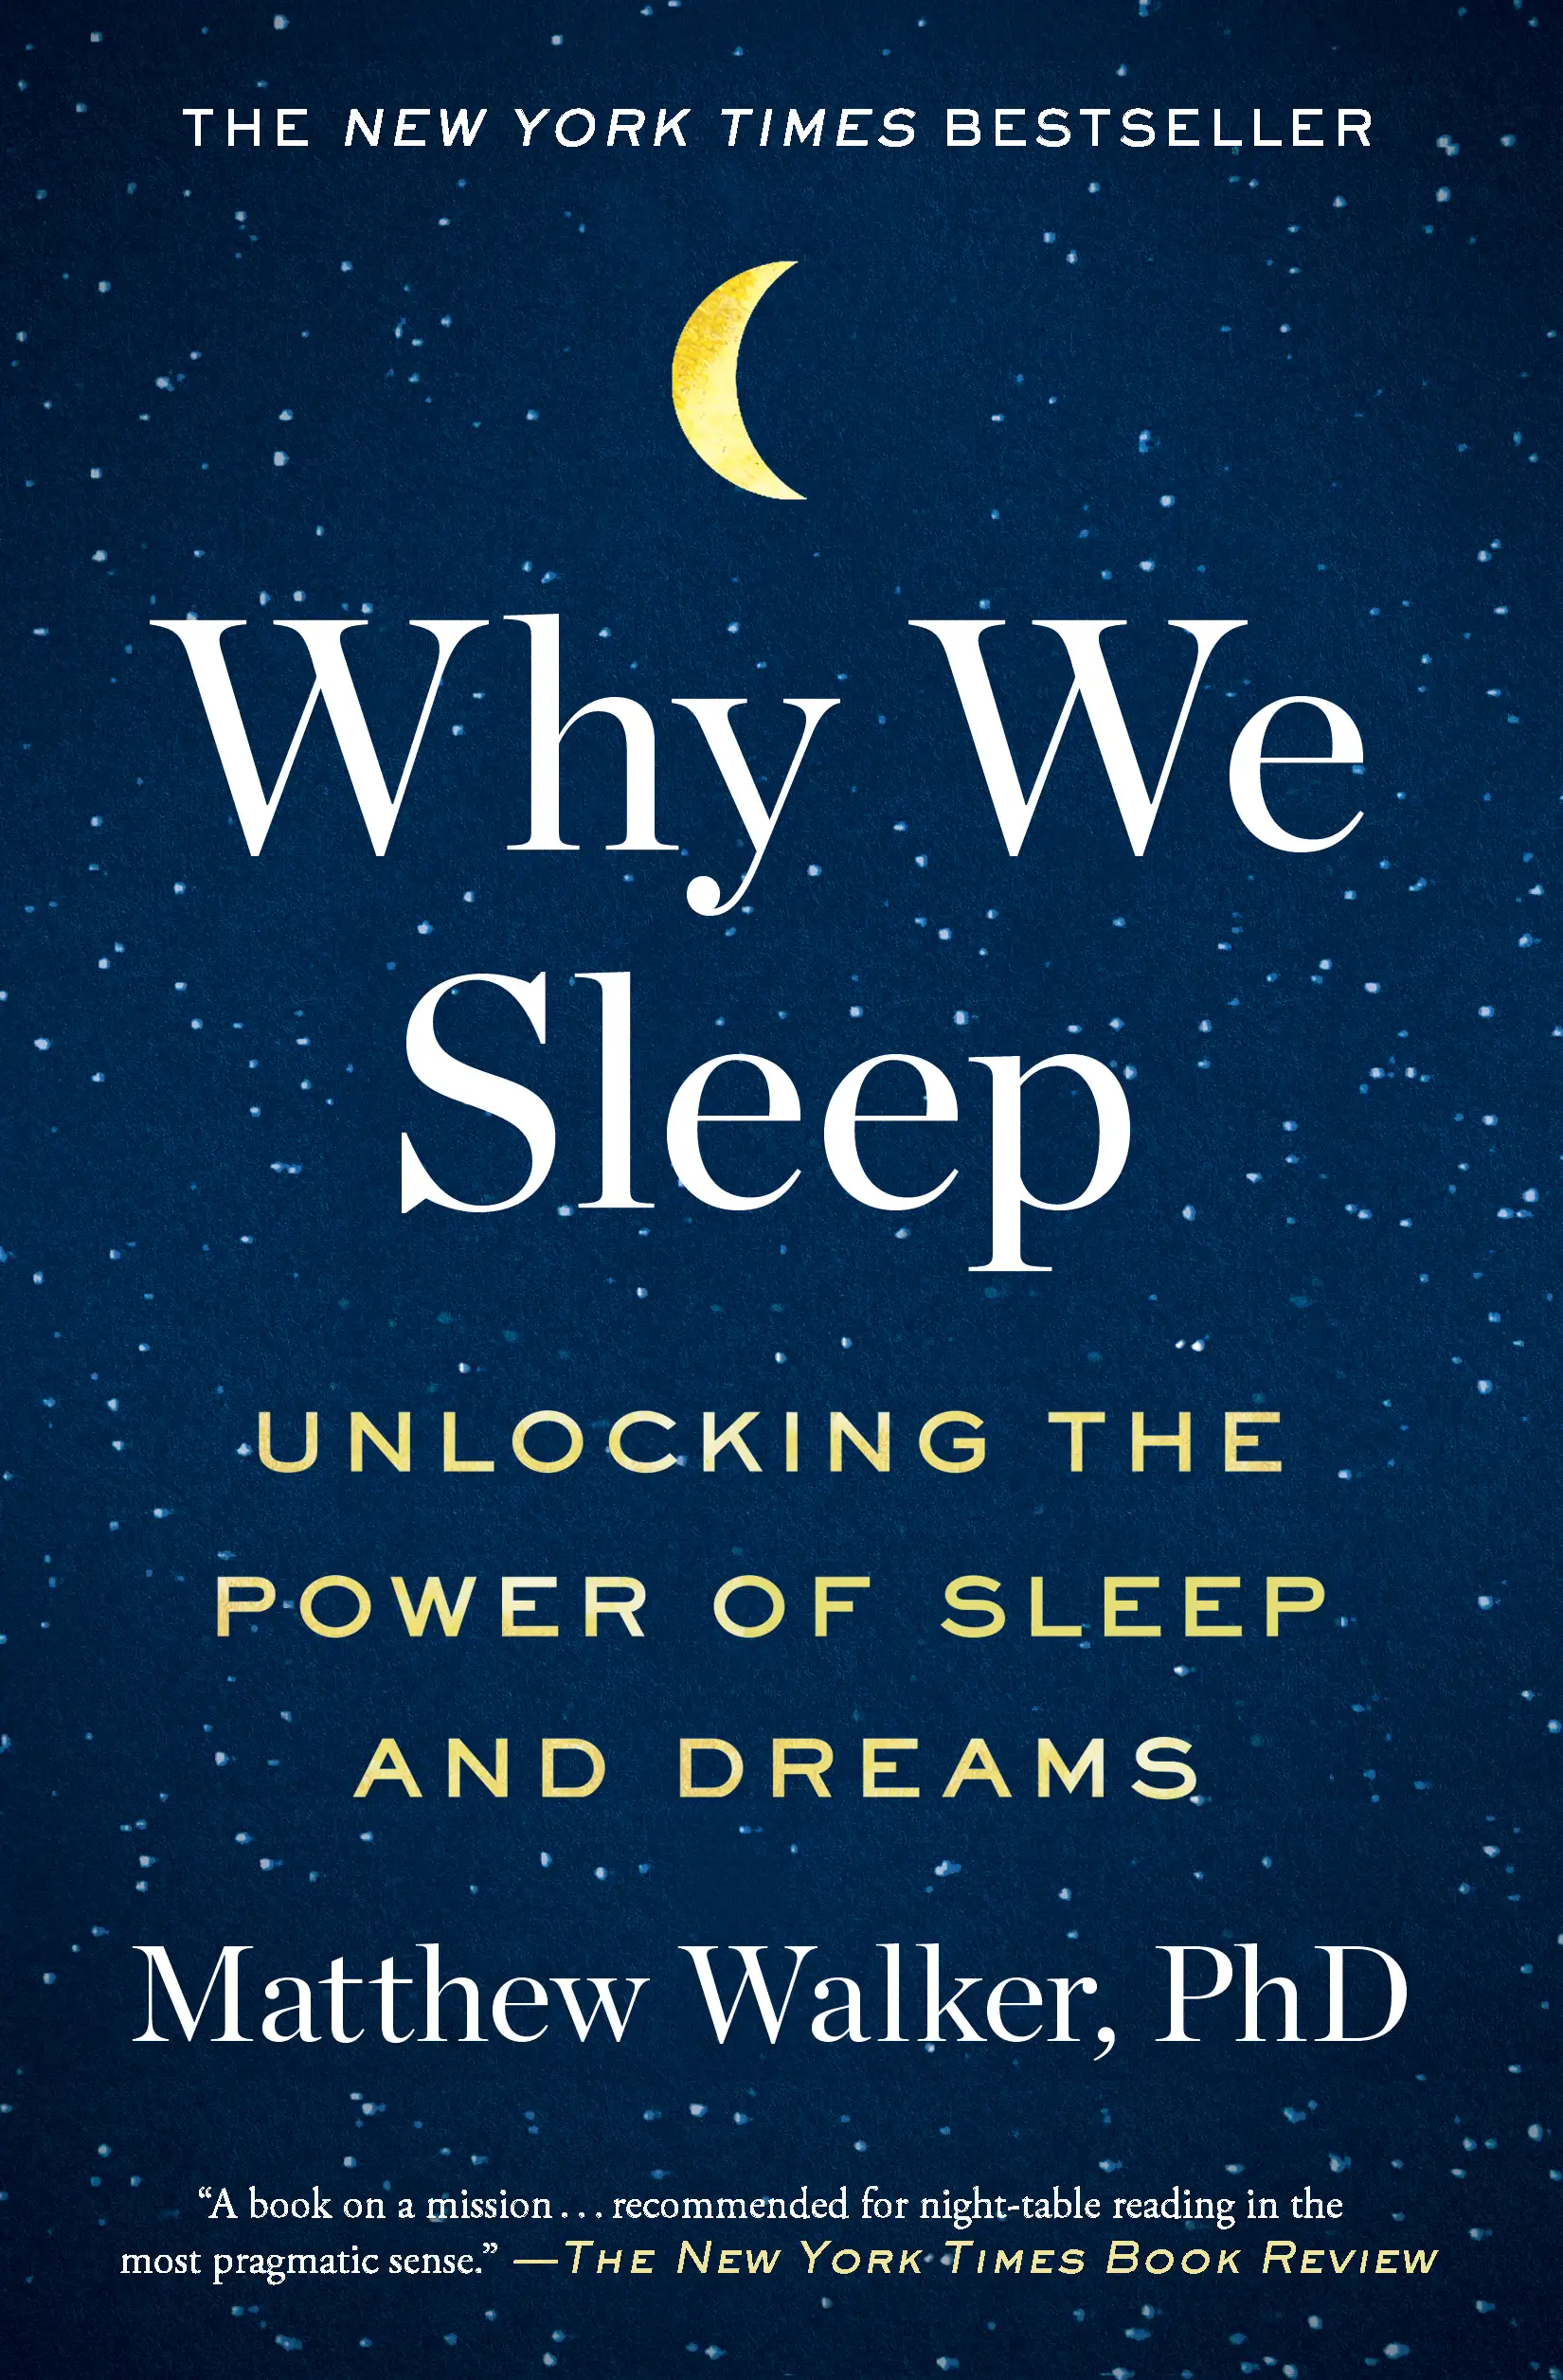 Why-We-Sleep-paperback-cover